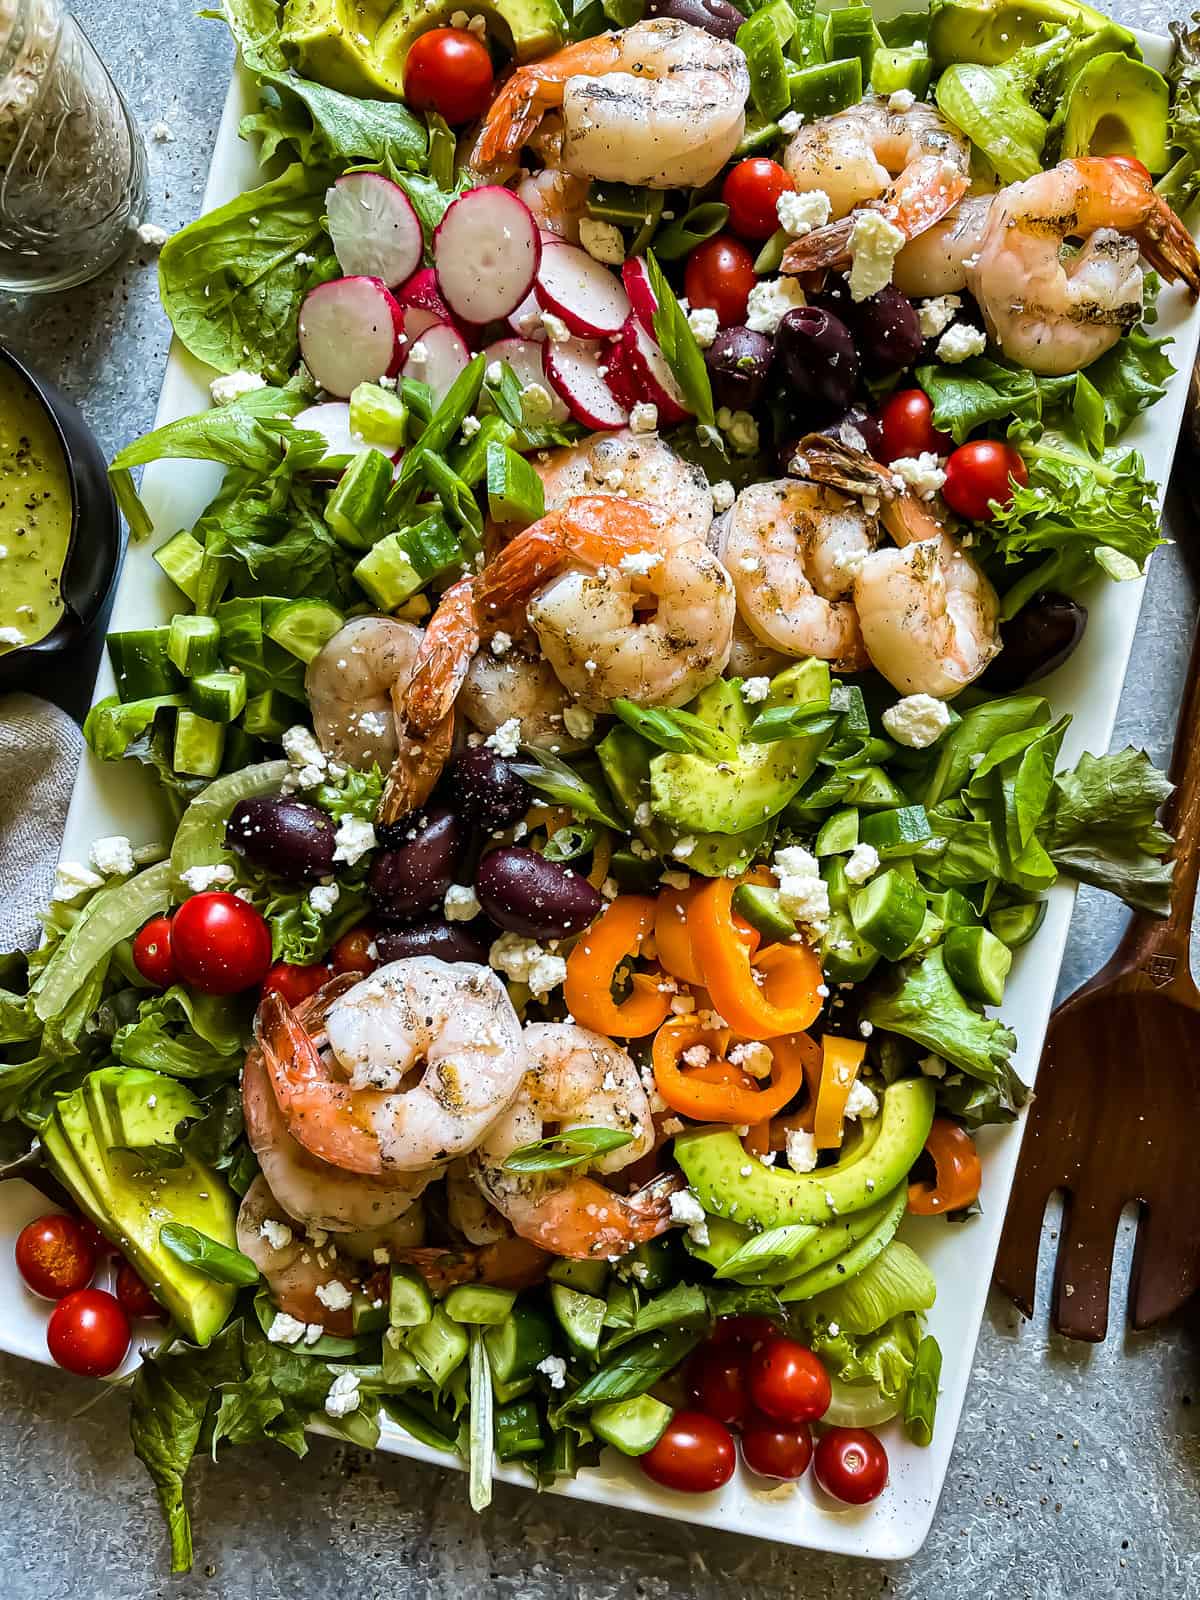 grilled shrimp salad with mixed greens, veggies, and a green onion vinaigrette